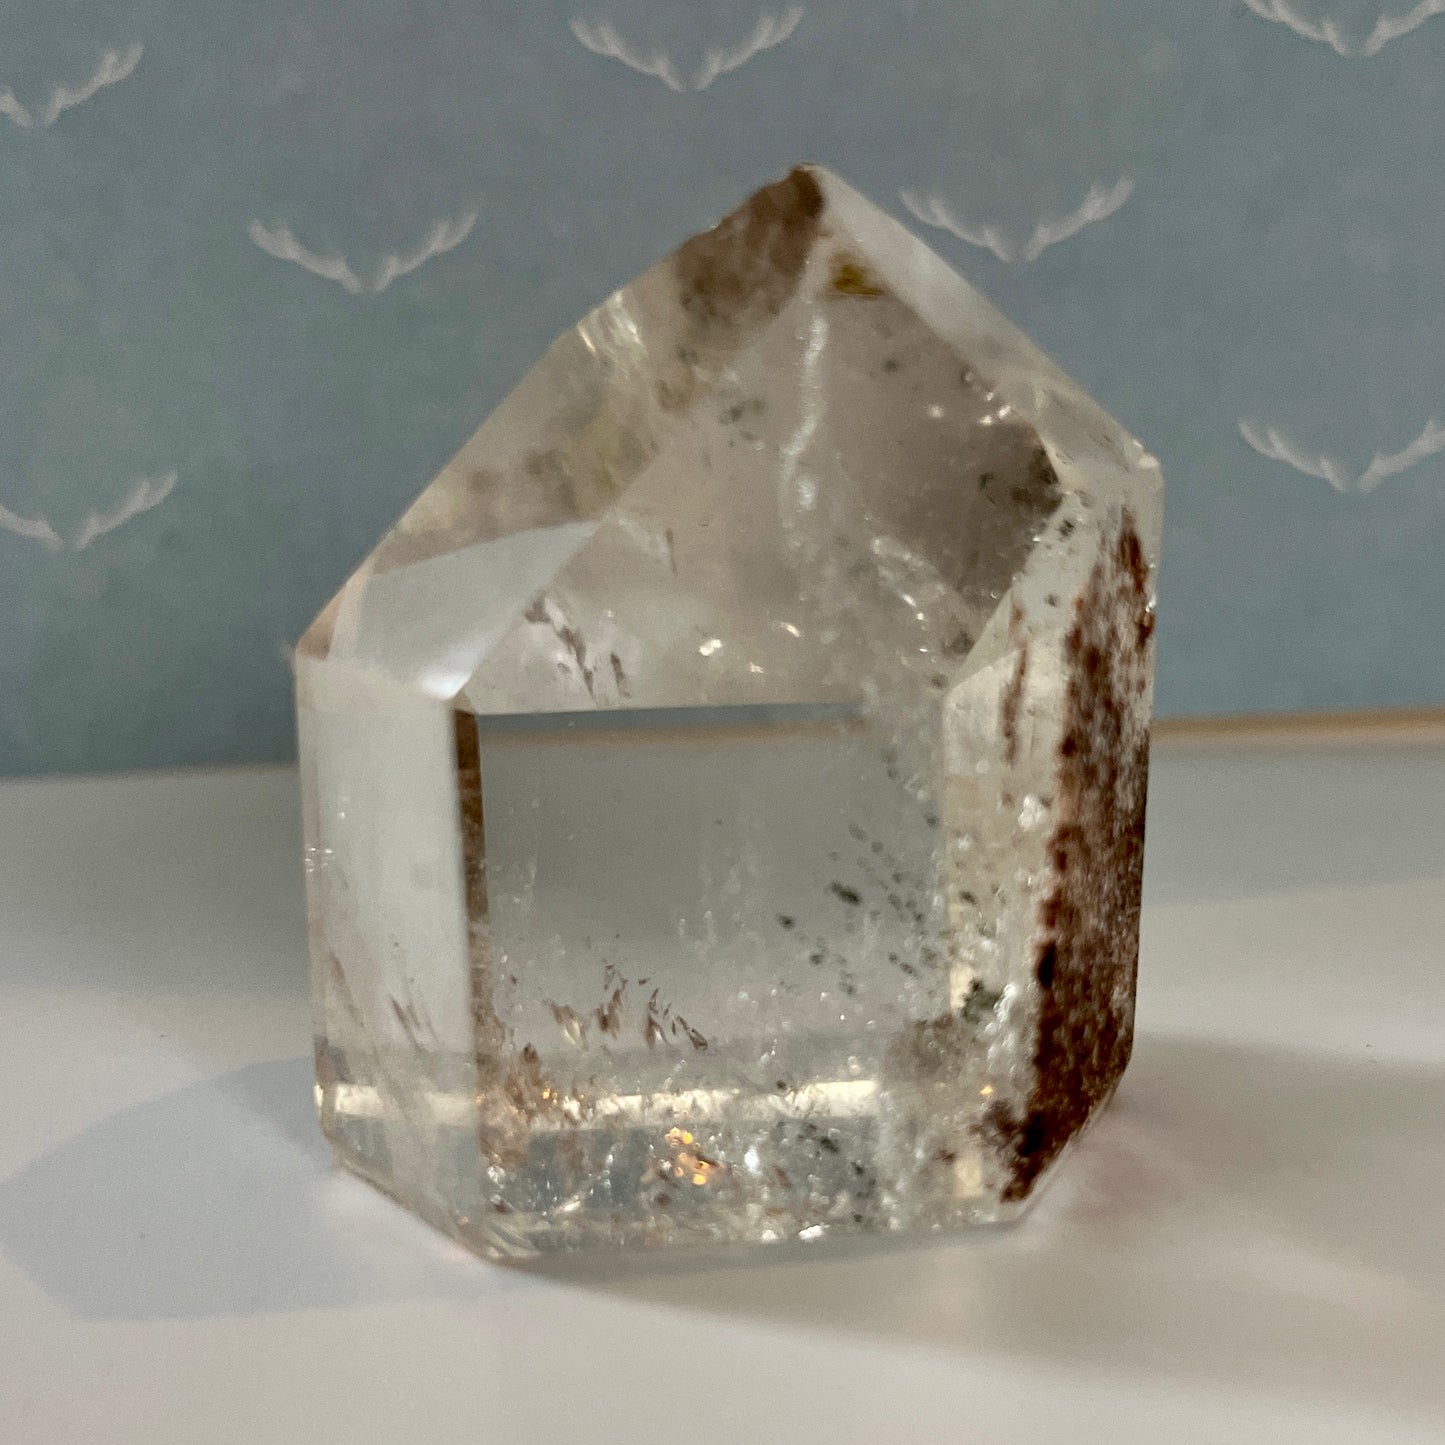 Clear Quartz Crystal Point with Inclusions